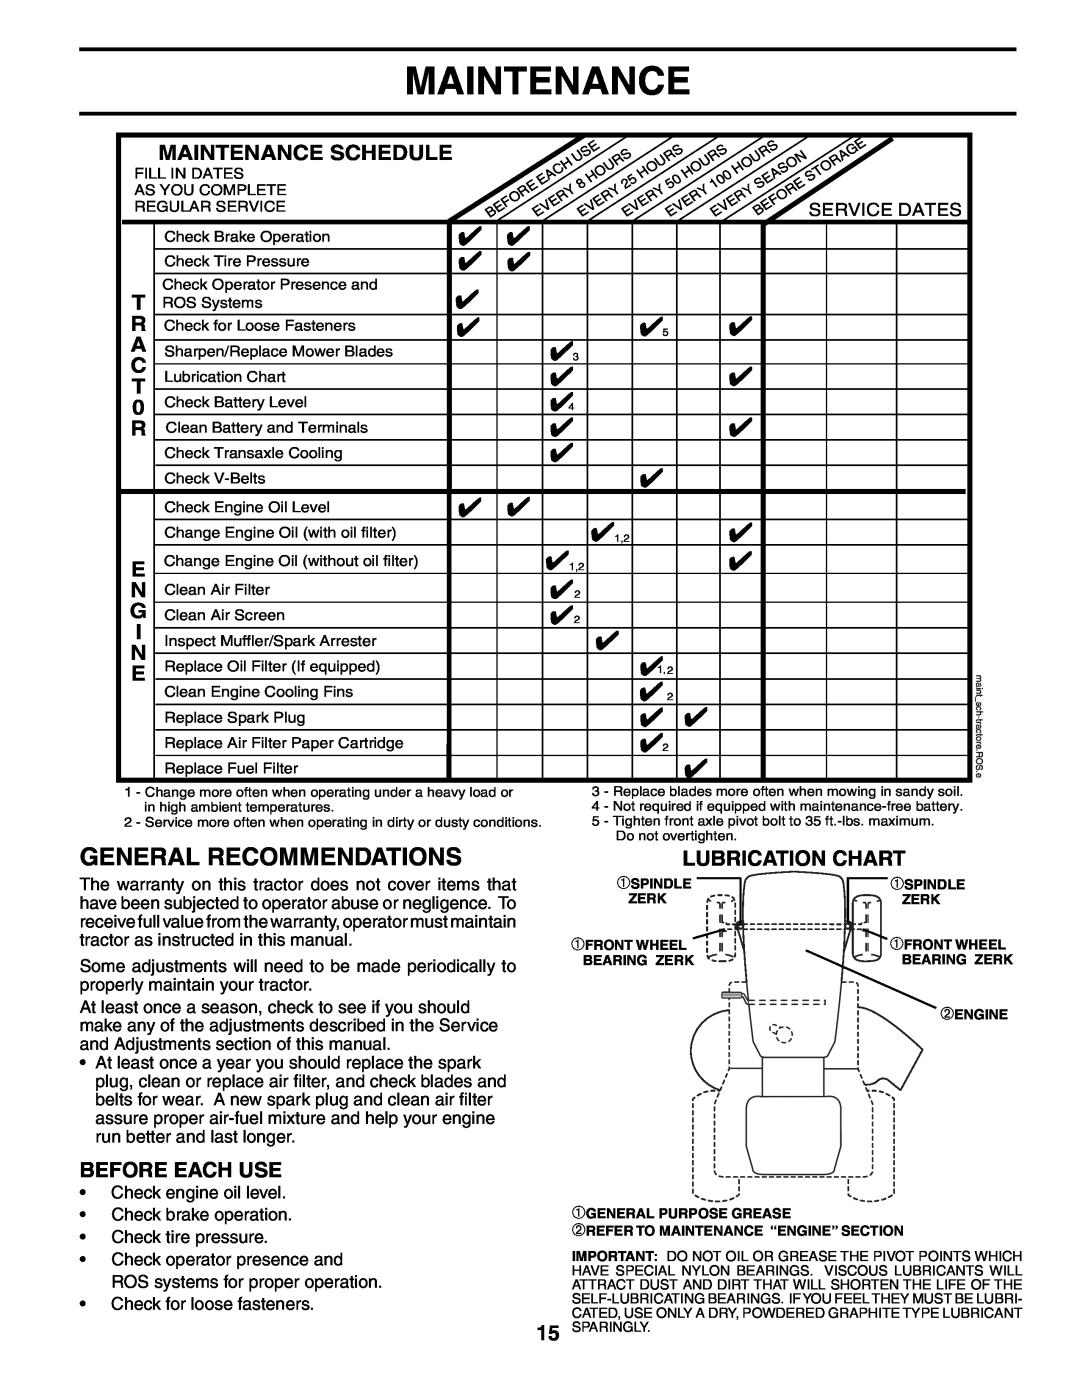 Poulan DB24H42YT manual General Recommendations, Lubrication Chart, Before Each Use, Maintenance Schedule 